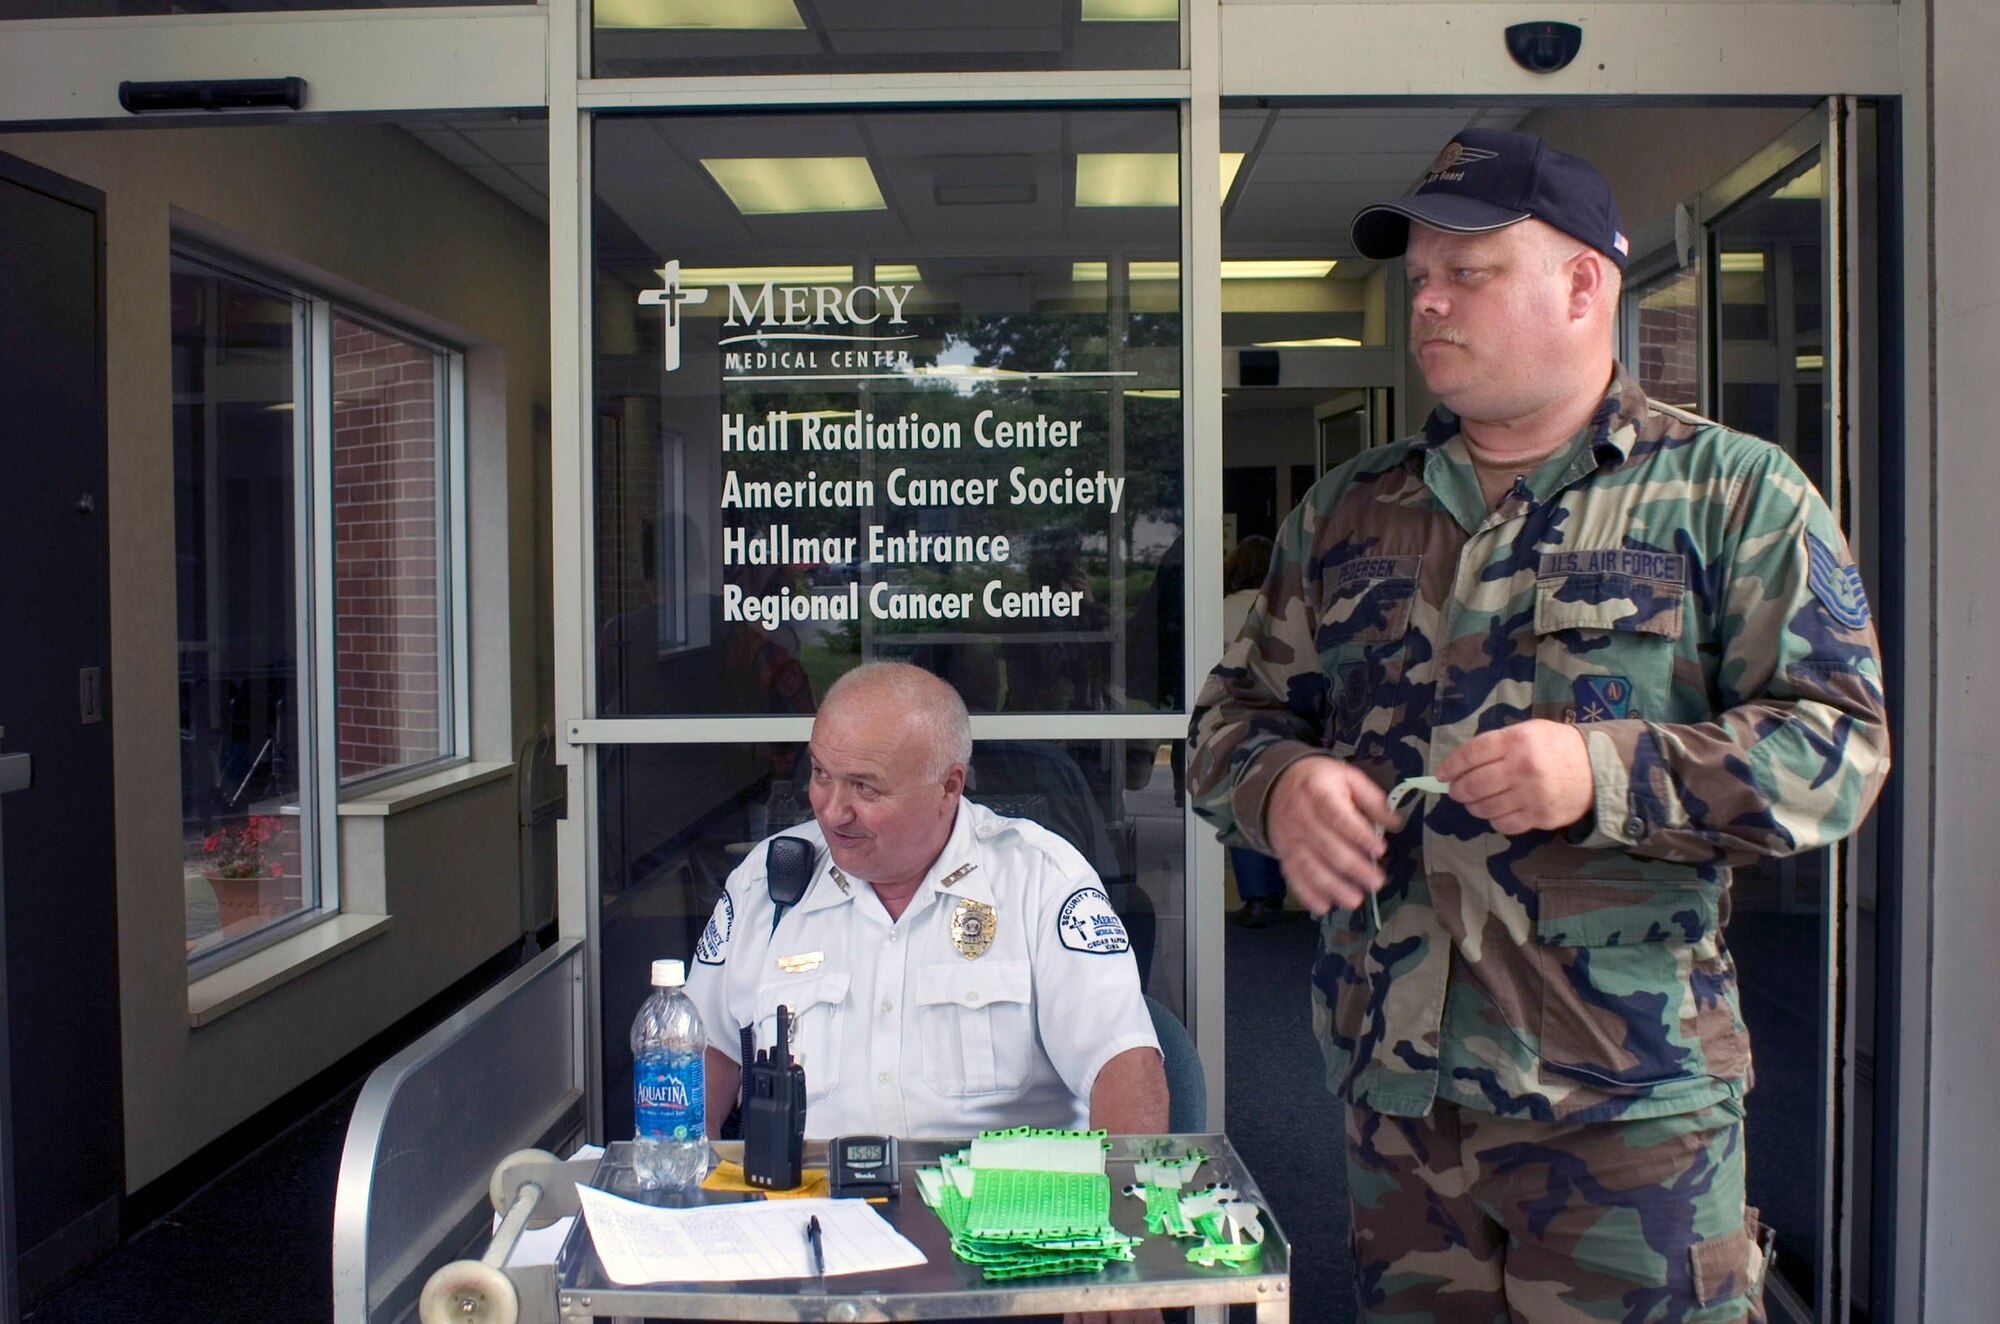 Tech. Sgt. Gregg Pedersen stands post outside the Mercy Medical Center in Cedar Rapids, Iowa, June 15. Sergeant Pedersen checks employees into the hospital by having workers sign in and wear a green wristband indicating they were cleared through a checkpoint. More than 150 Airmen arrived in Cedar Rapids today to help secure and recover areas that were affected by flood waters. Sergeant Pedersen is assigned to the 185th Air Refueling Wing located in Sioux City, Iowa. (U.S. Air Force photo/Staff Sgt. Desiree N. Palacios) 
